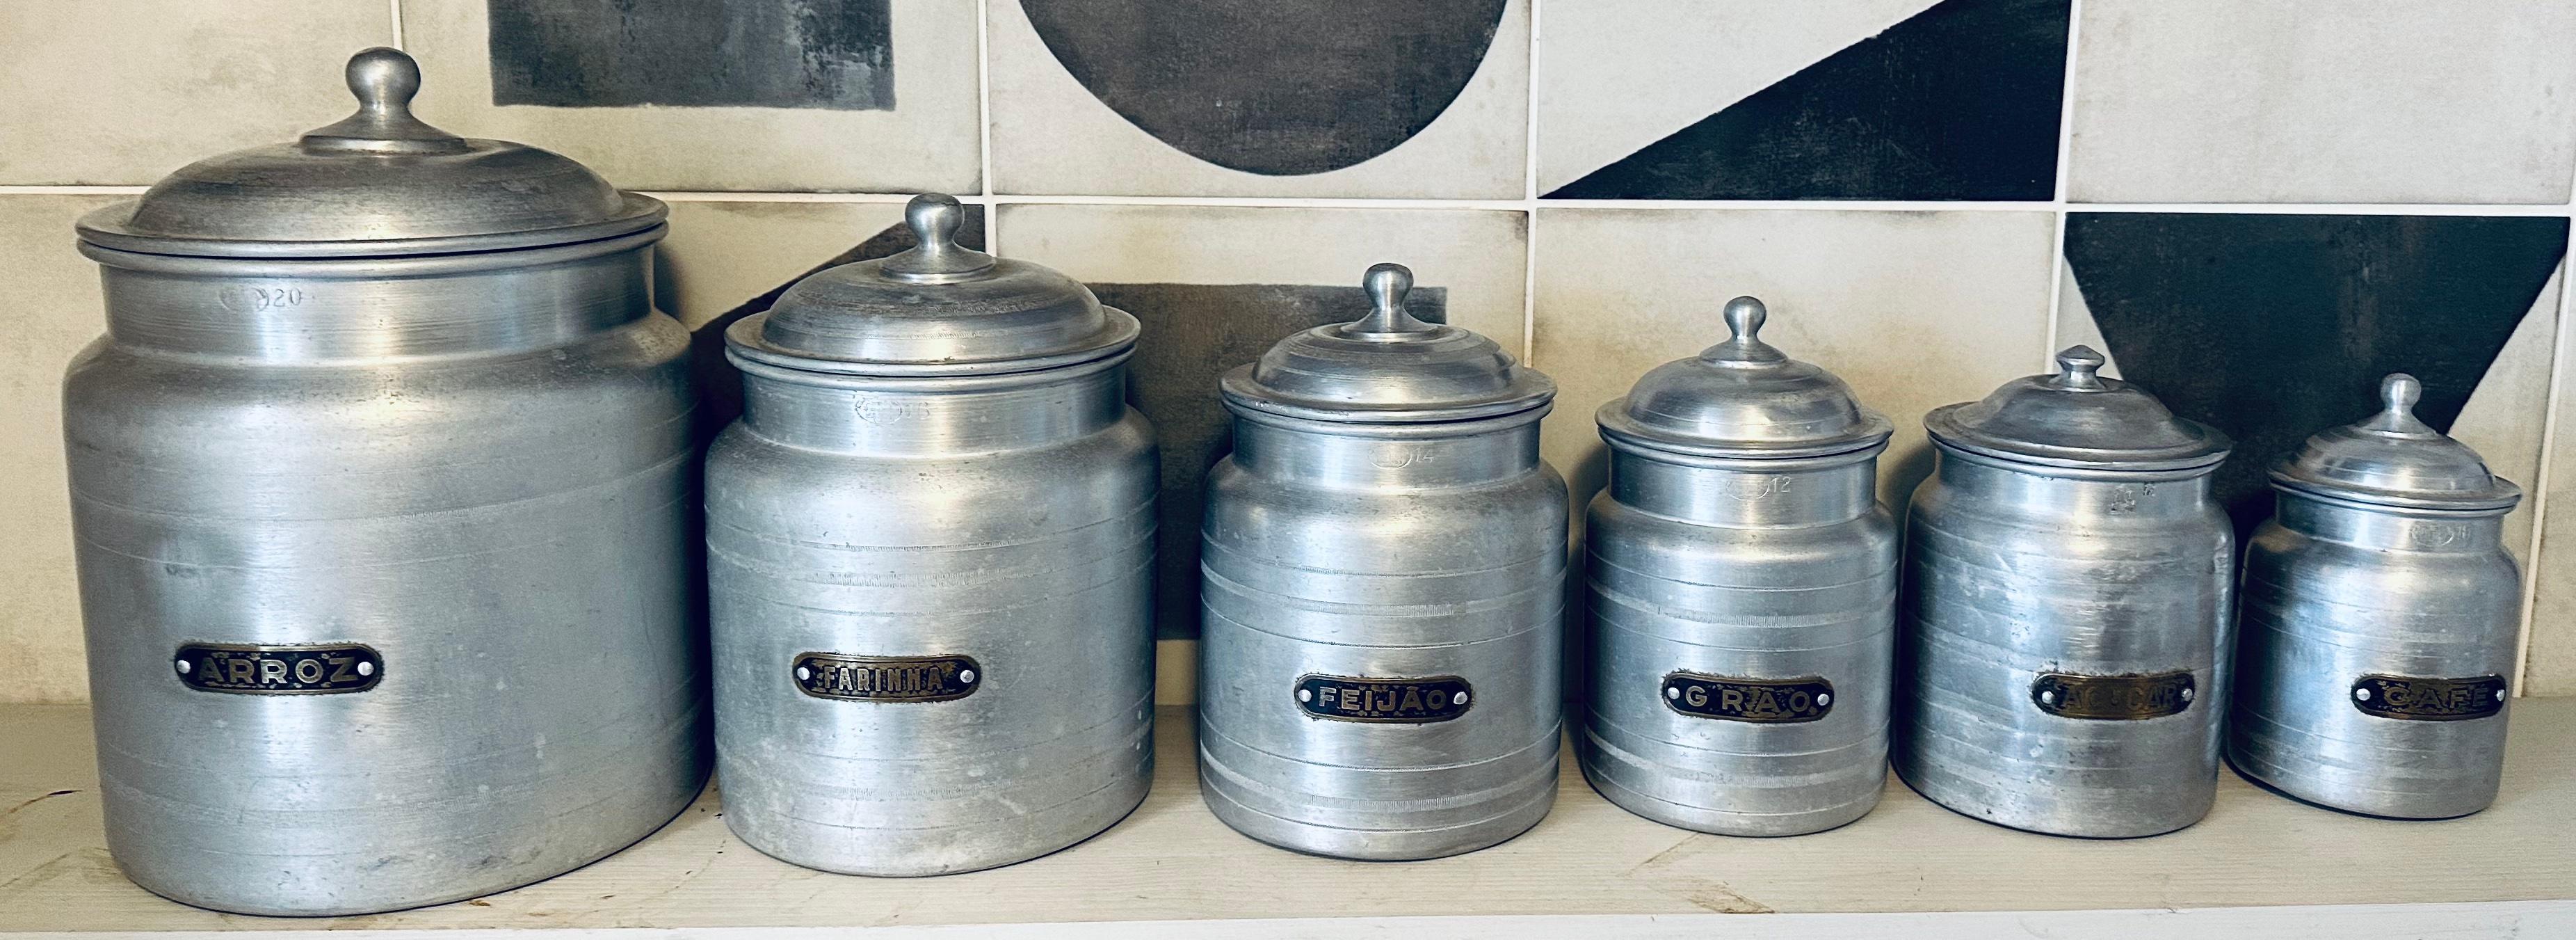 Set of 6 decorative and functional Portuguese kitchen storage jars for both modern and rustic style kitchens to add an air of vintage times past, interest and fun. The canisters are very useful and not only can they be used for decoration but to